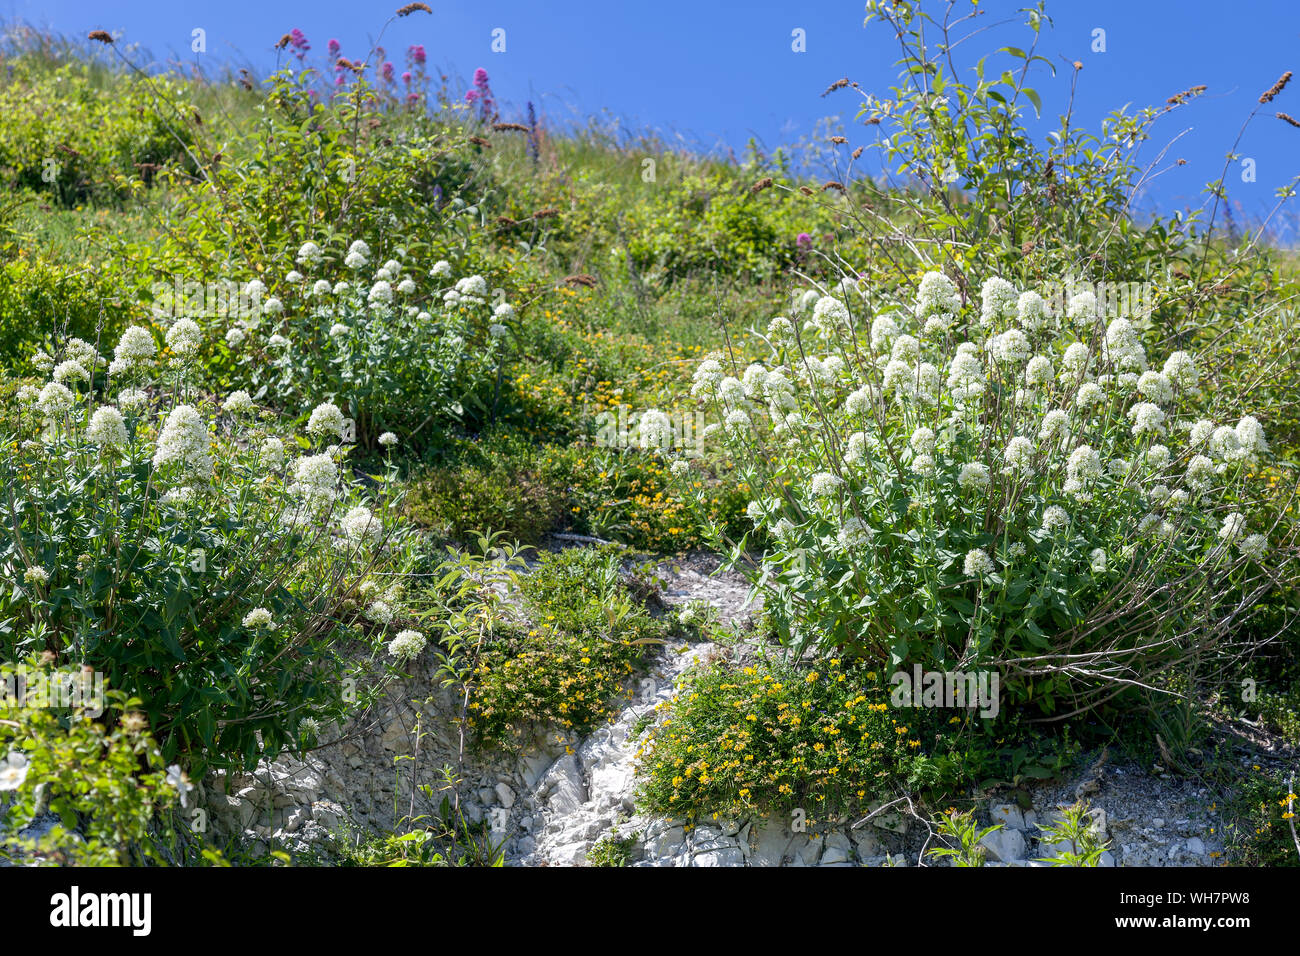 White Valerian (Centranthus ruber alba) growing on cliffs at Eastbourne Stock Photo